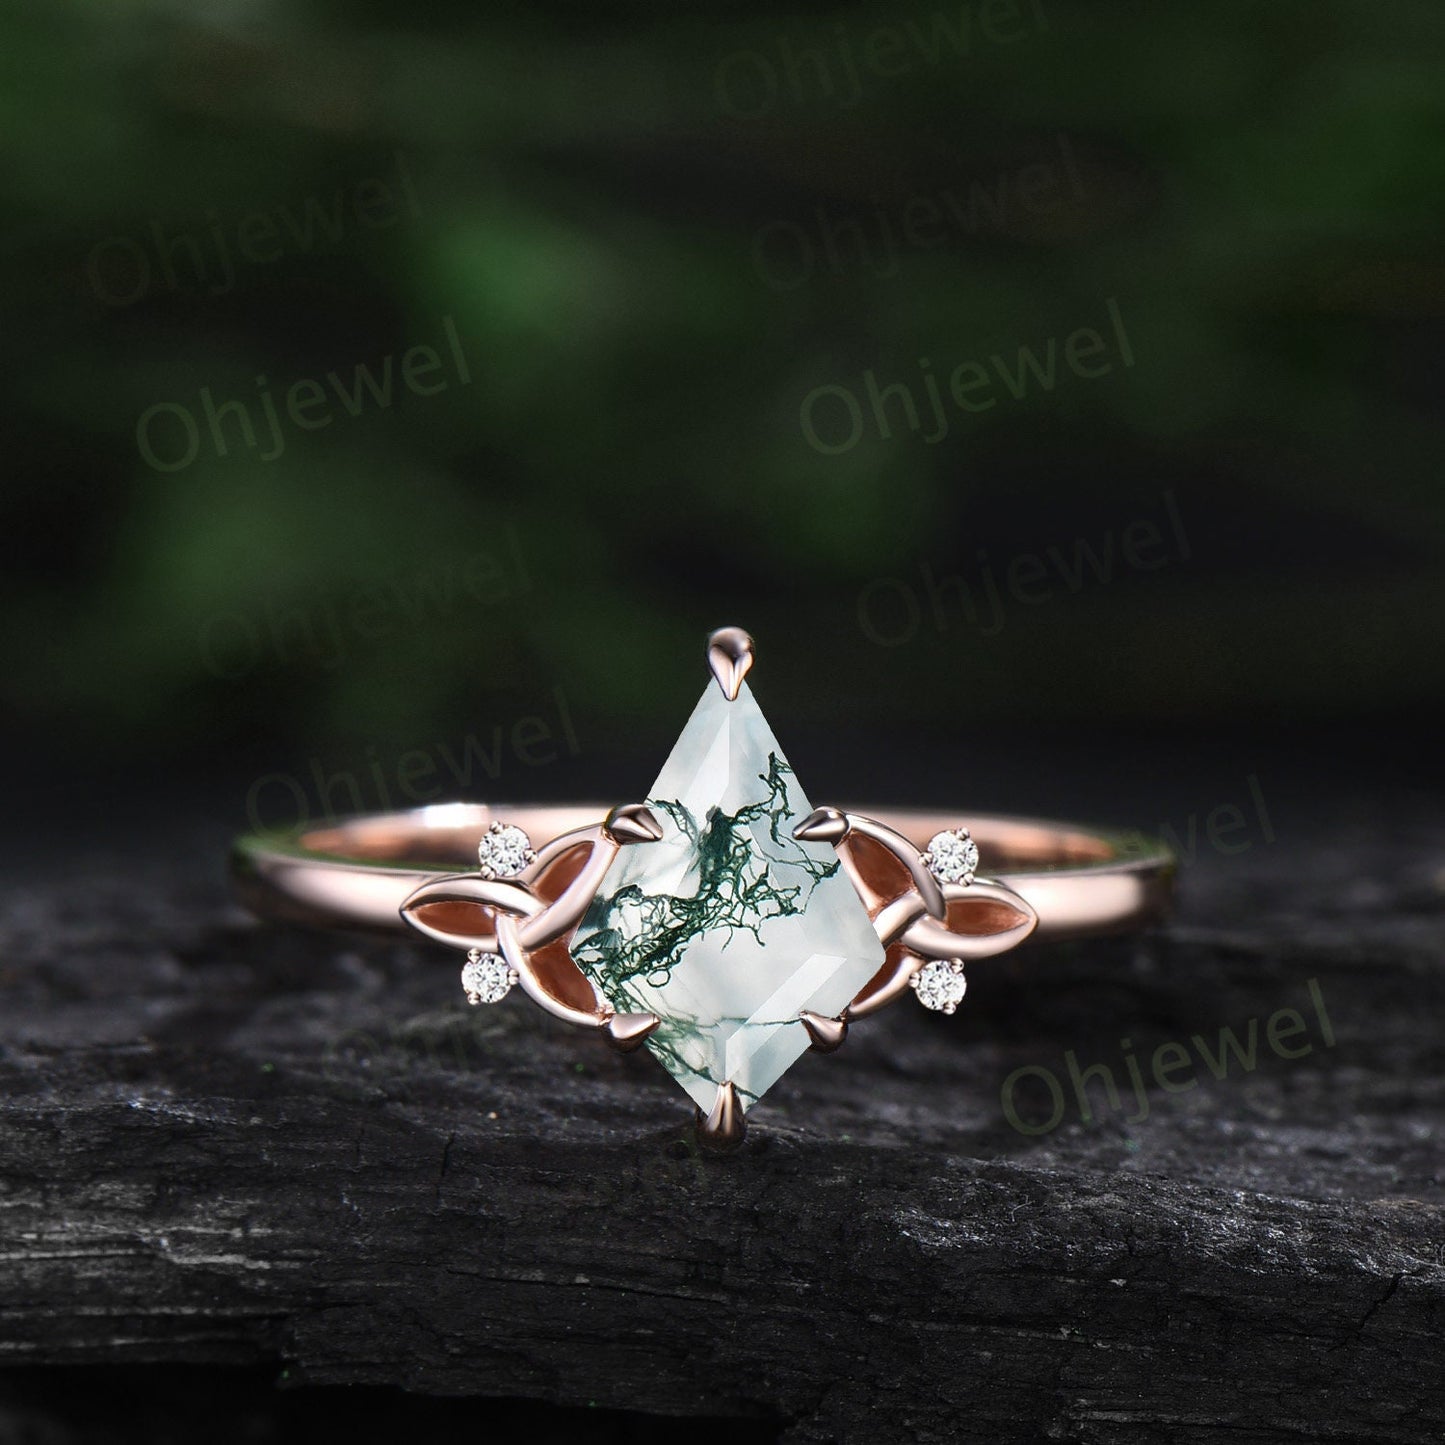 Green moss agate ring women vintage Kite cut moss agate engagement ring Celtic Knot rose gold cluster diamond ring unique promise ring set